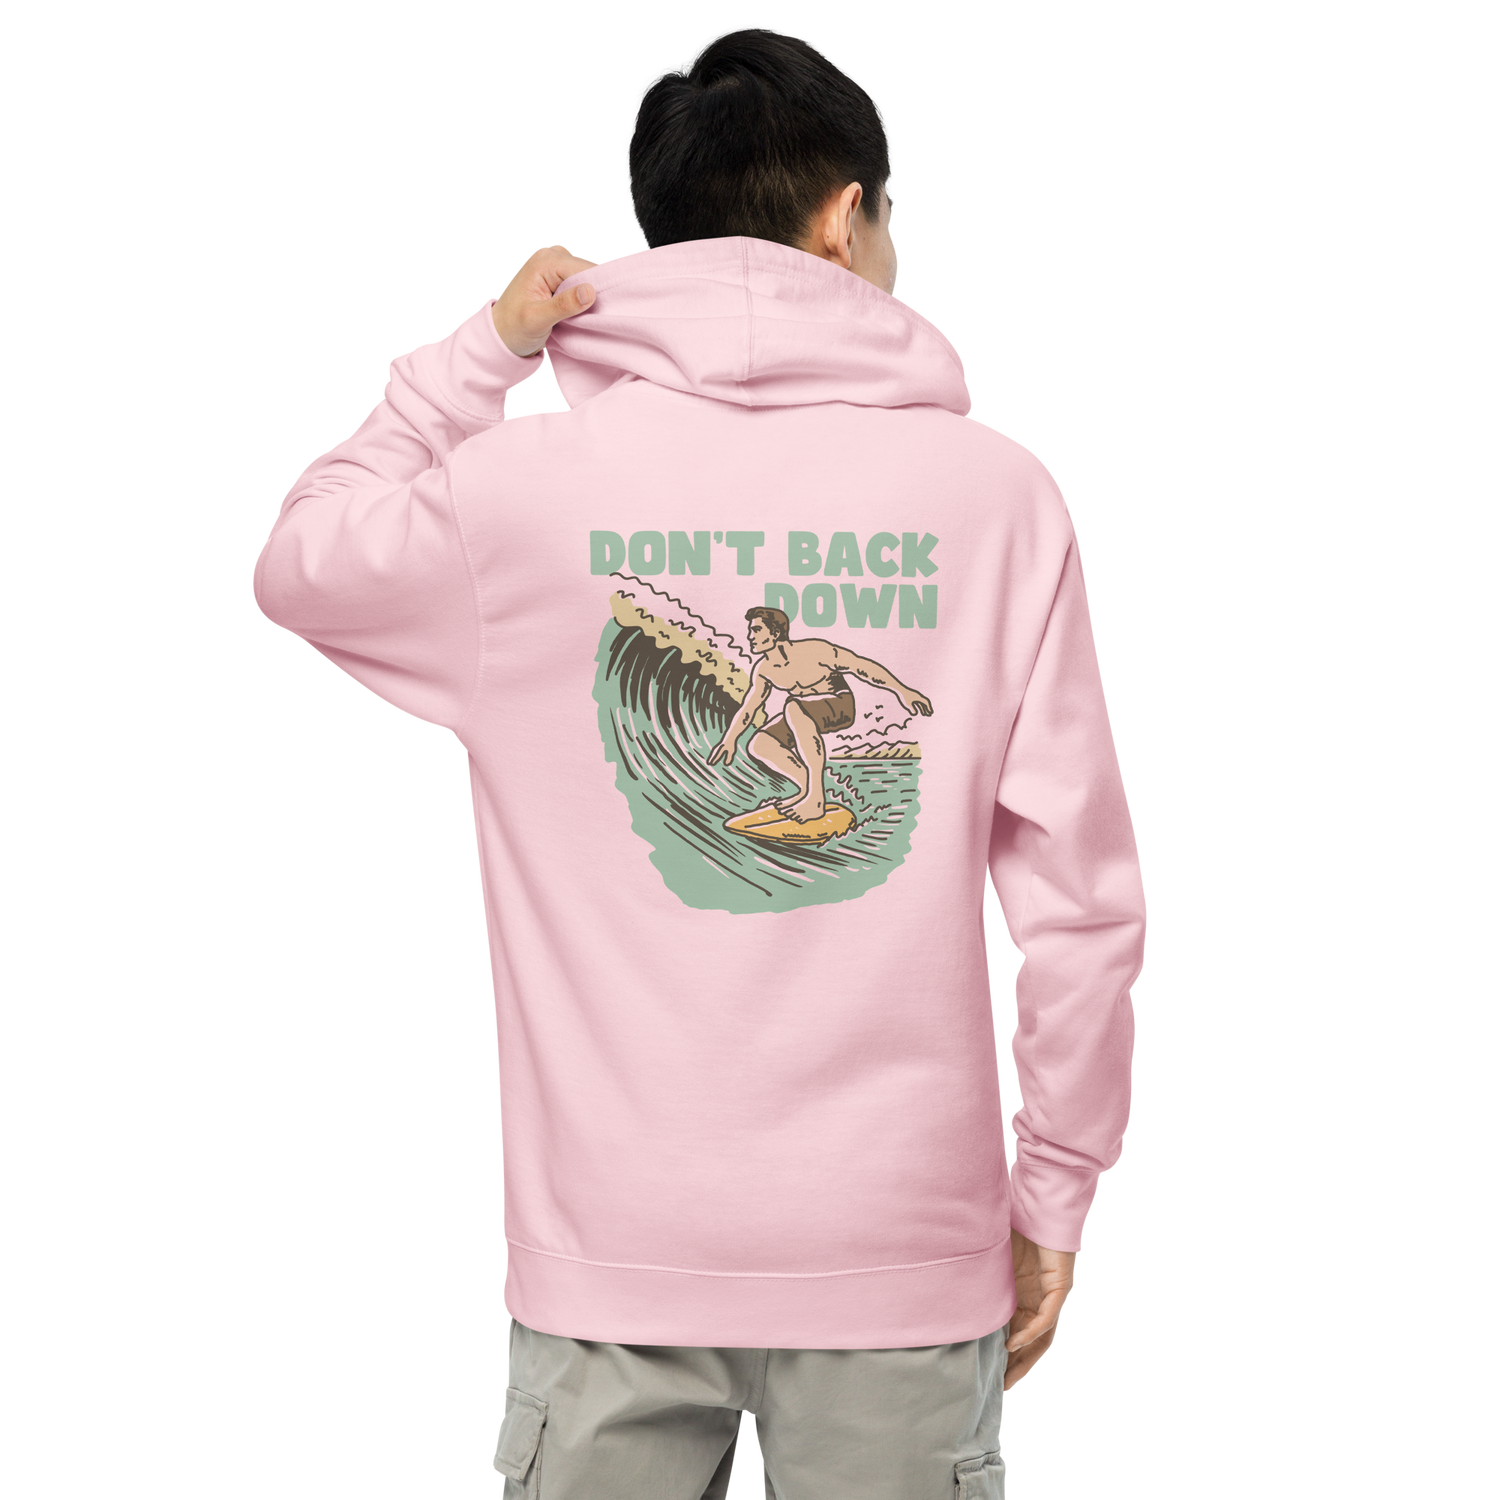 Catch The Wave Hoodie